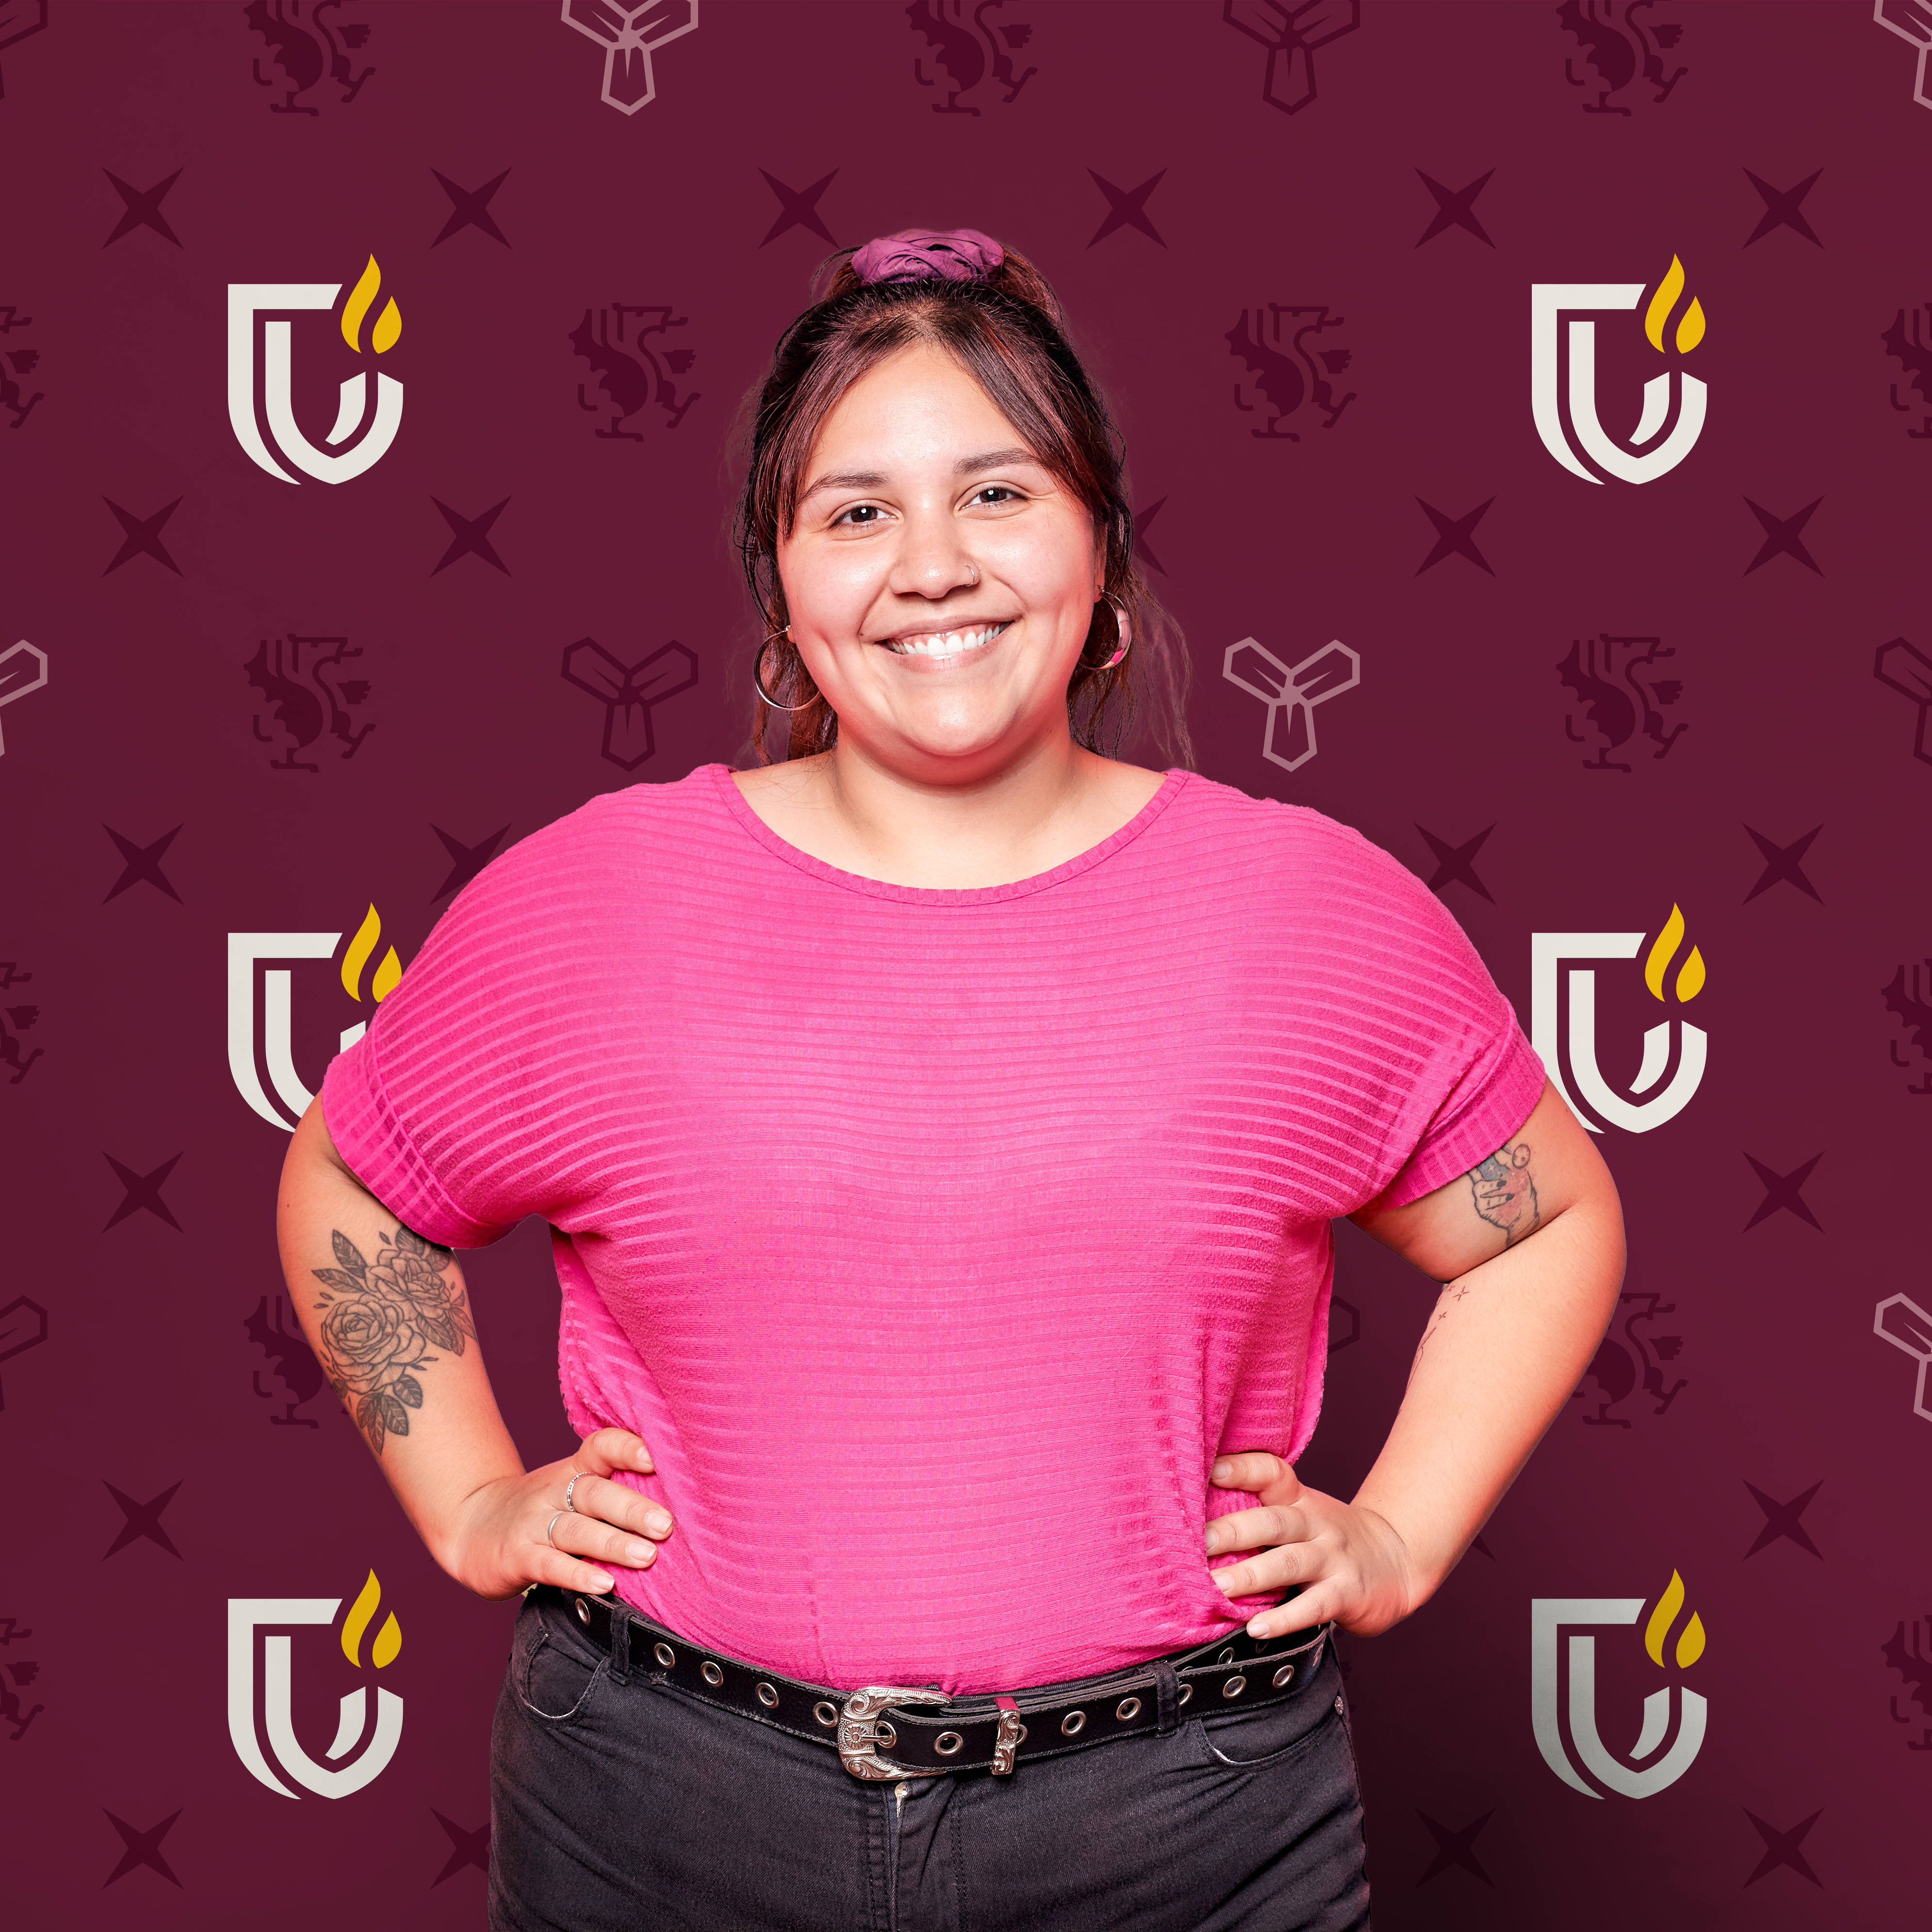 Woman in front of a backdrop that features the Cambrian College logo in a pattern on a burgundy background